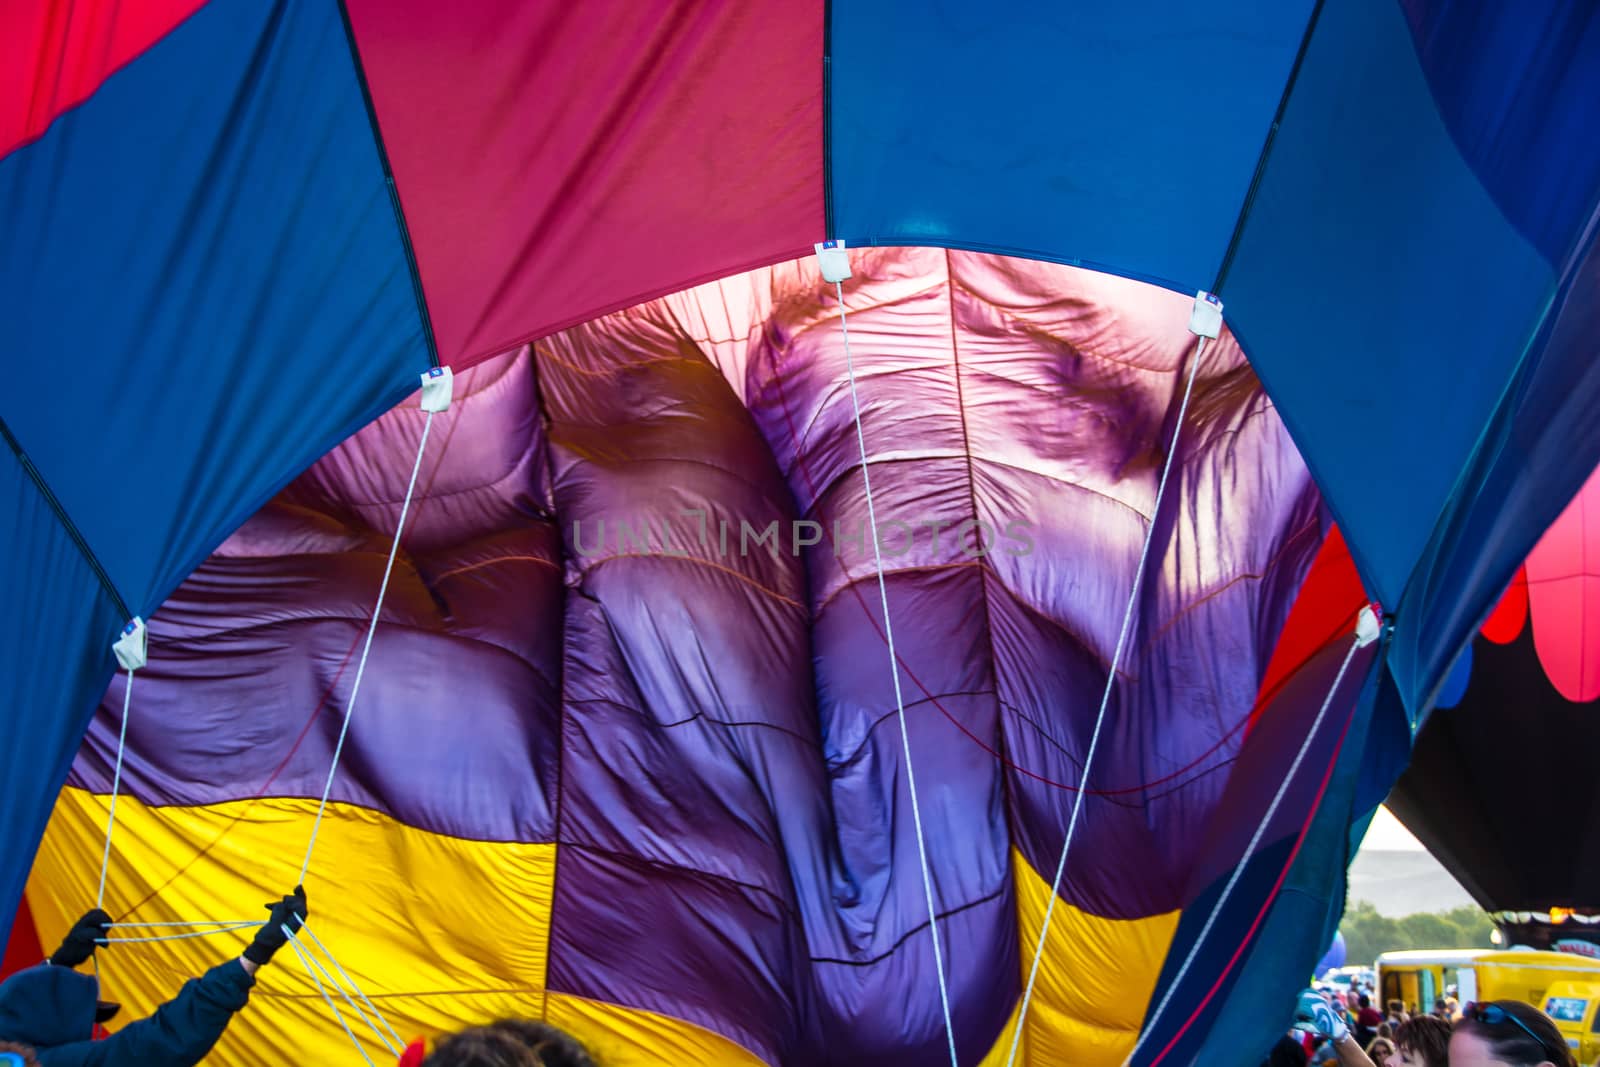 Ground crew holds guys whil the burner inflates this colorful hot air balloon